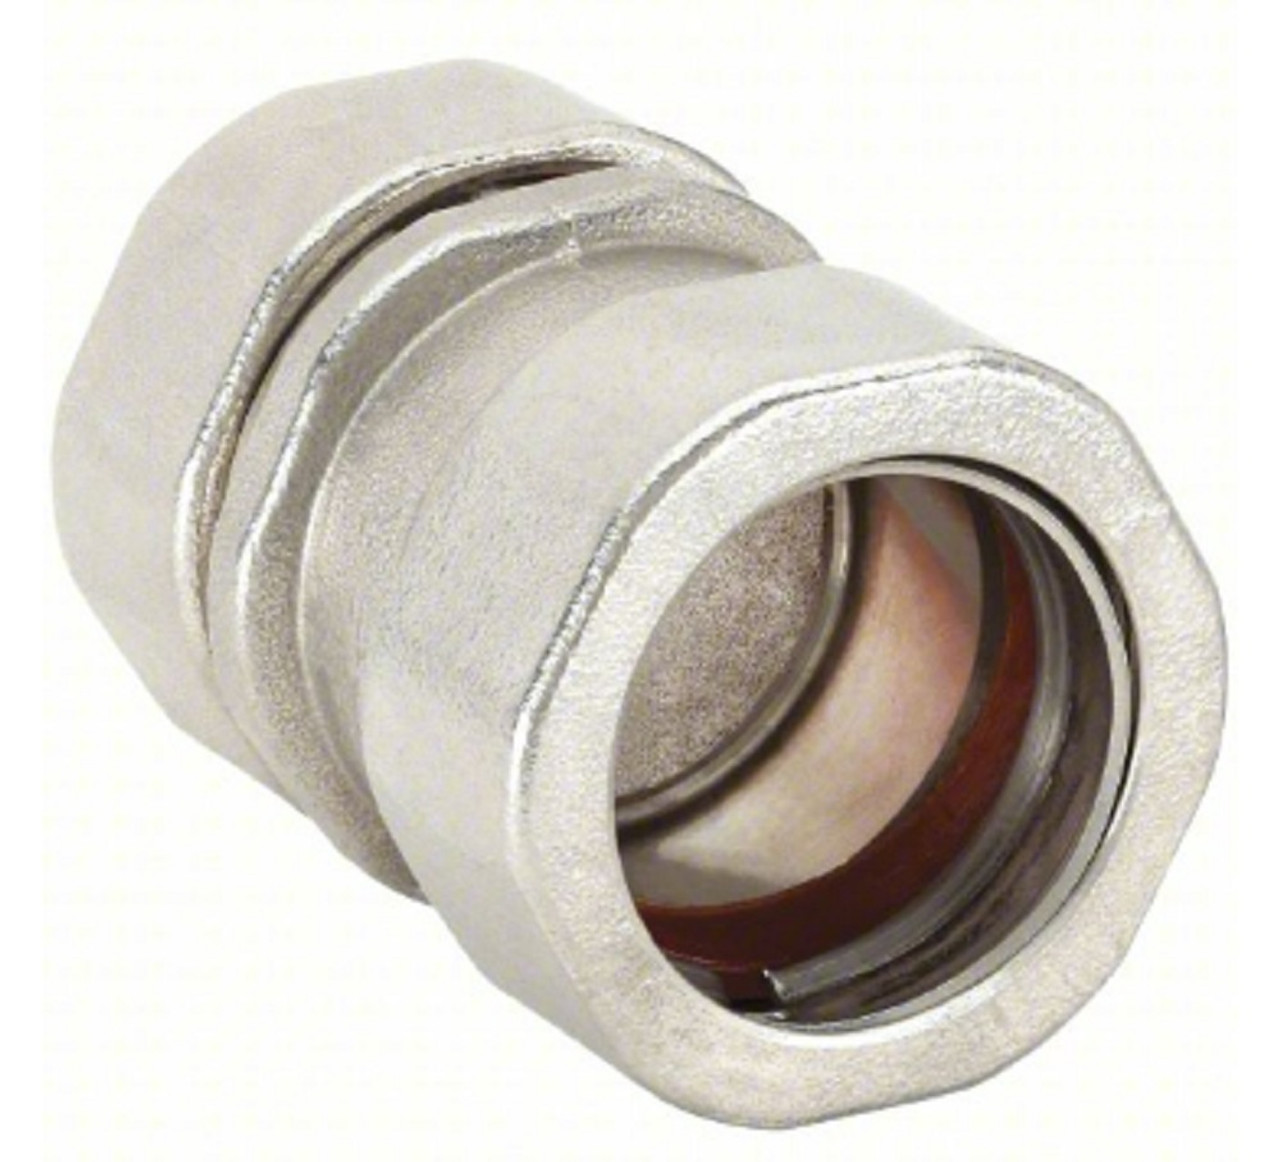 Calbrite S21000CC00 EMT Male Compression Connector, 1 in, 316 Stainless Steel [New]